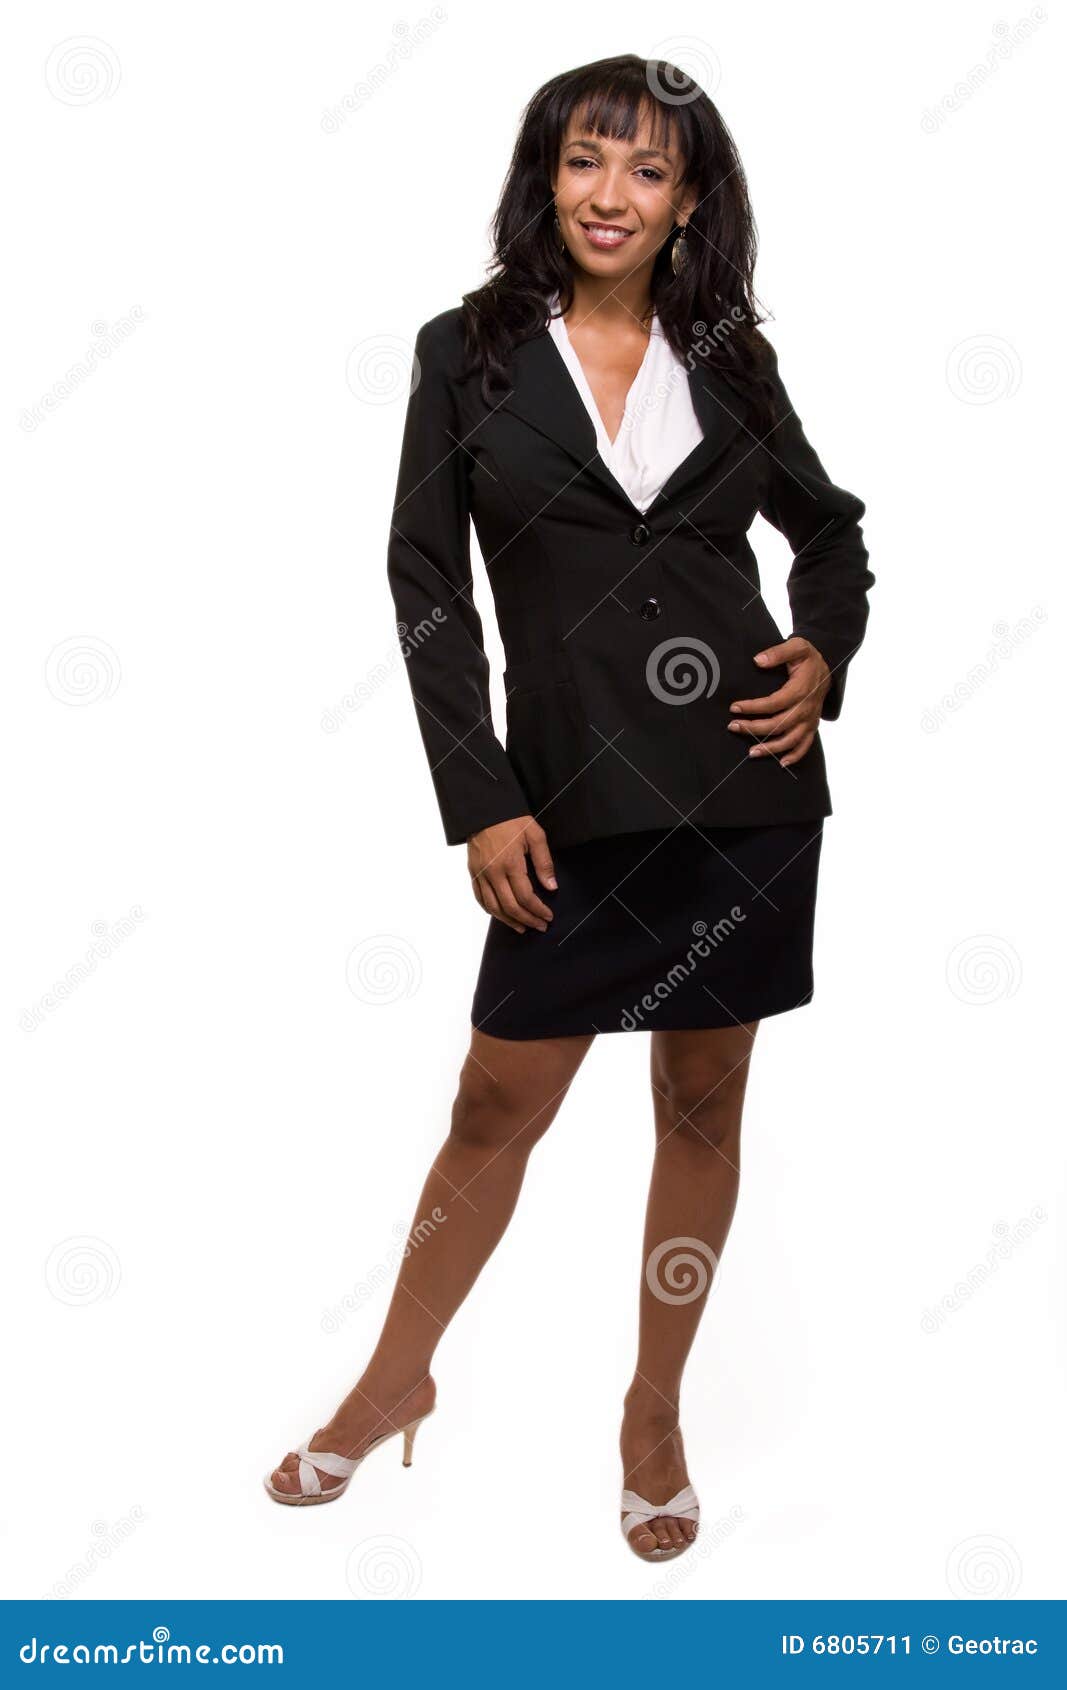 Full Body Of Business Woman Stock Image - Image: 6805711